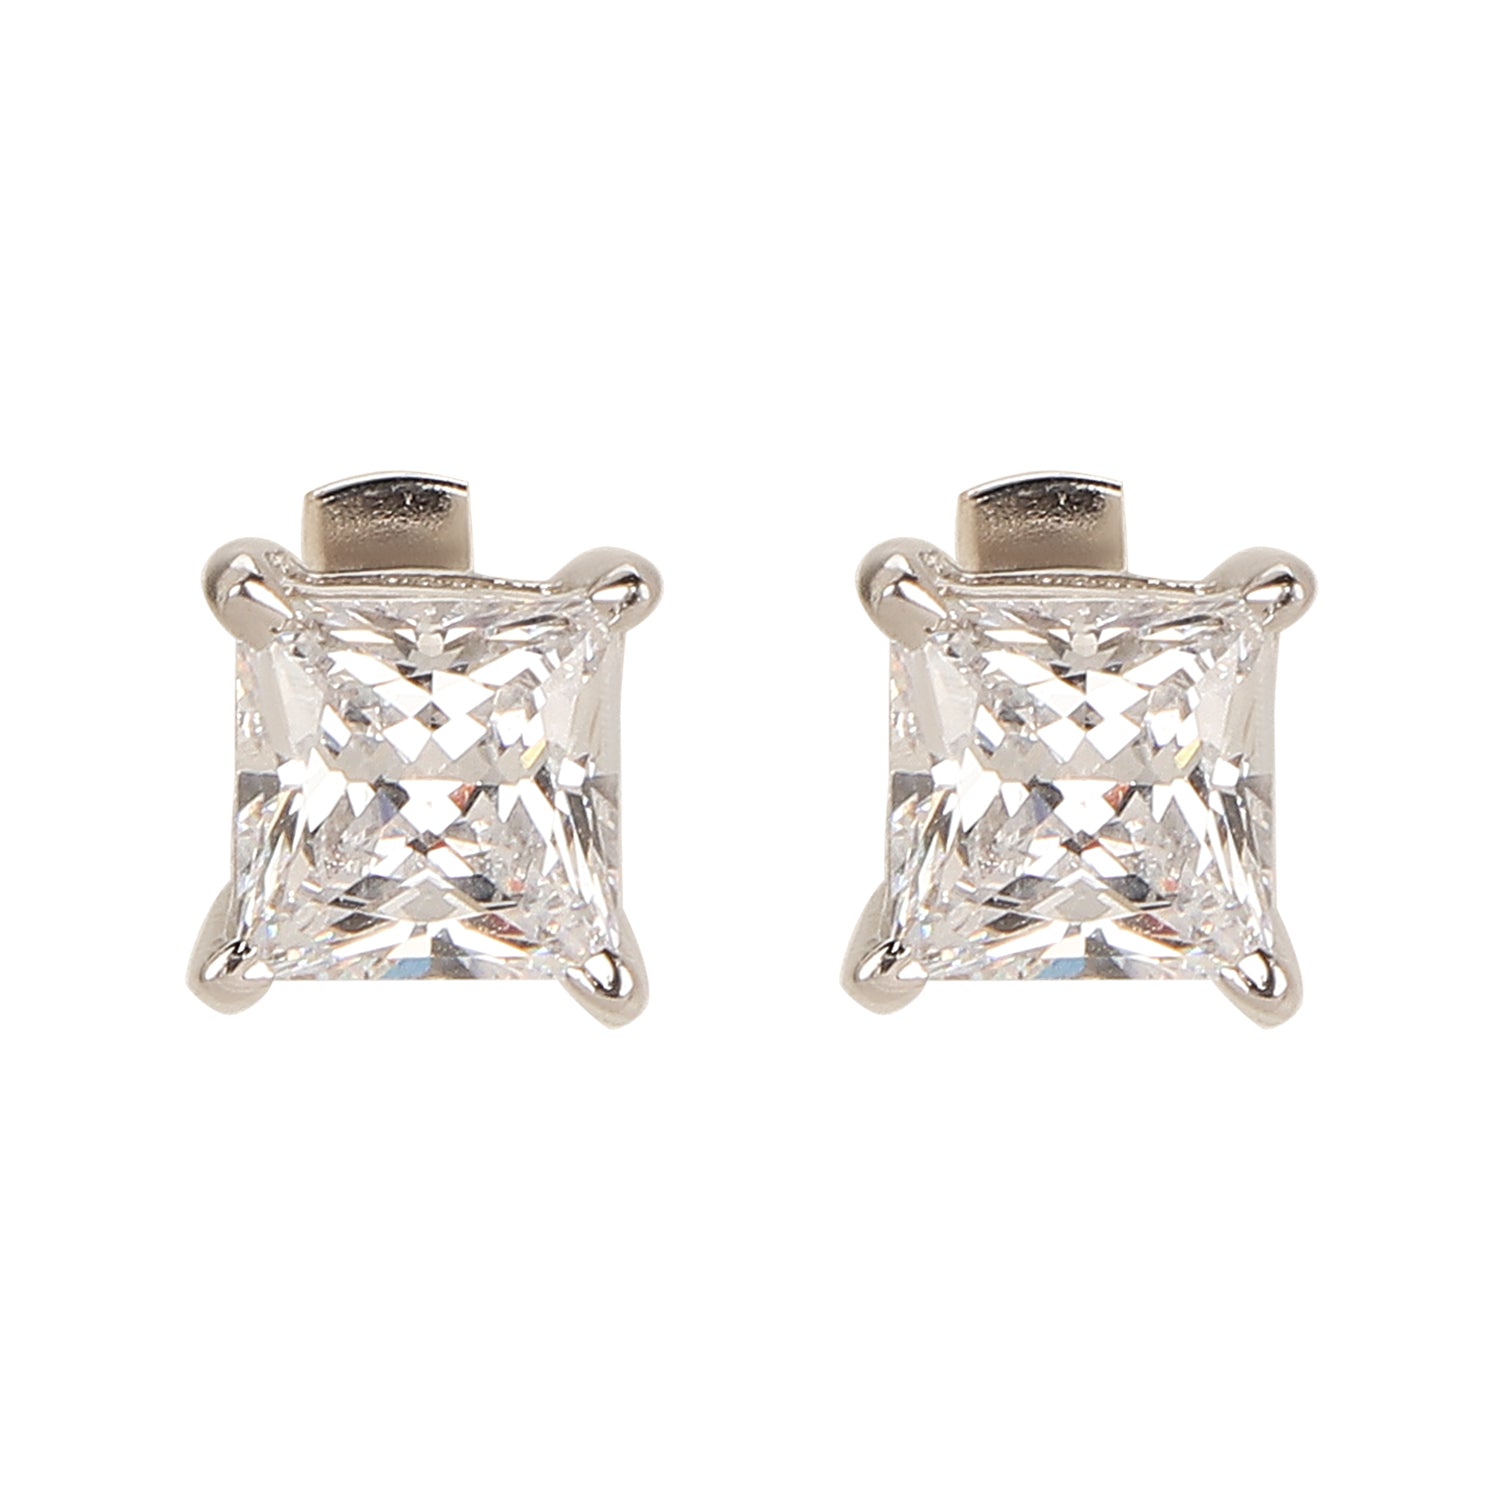 925 Silver Square Solitaire Earrings - Amrrutam